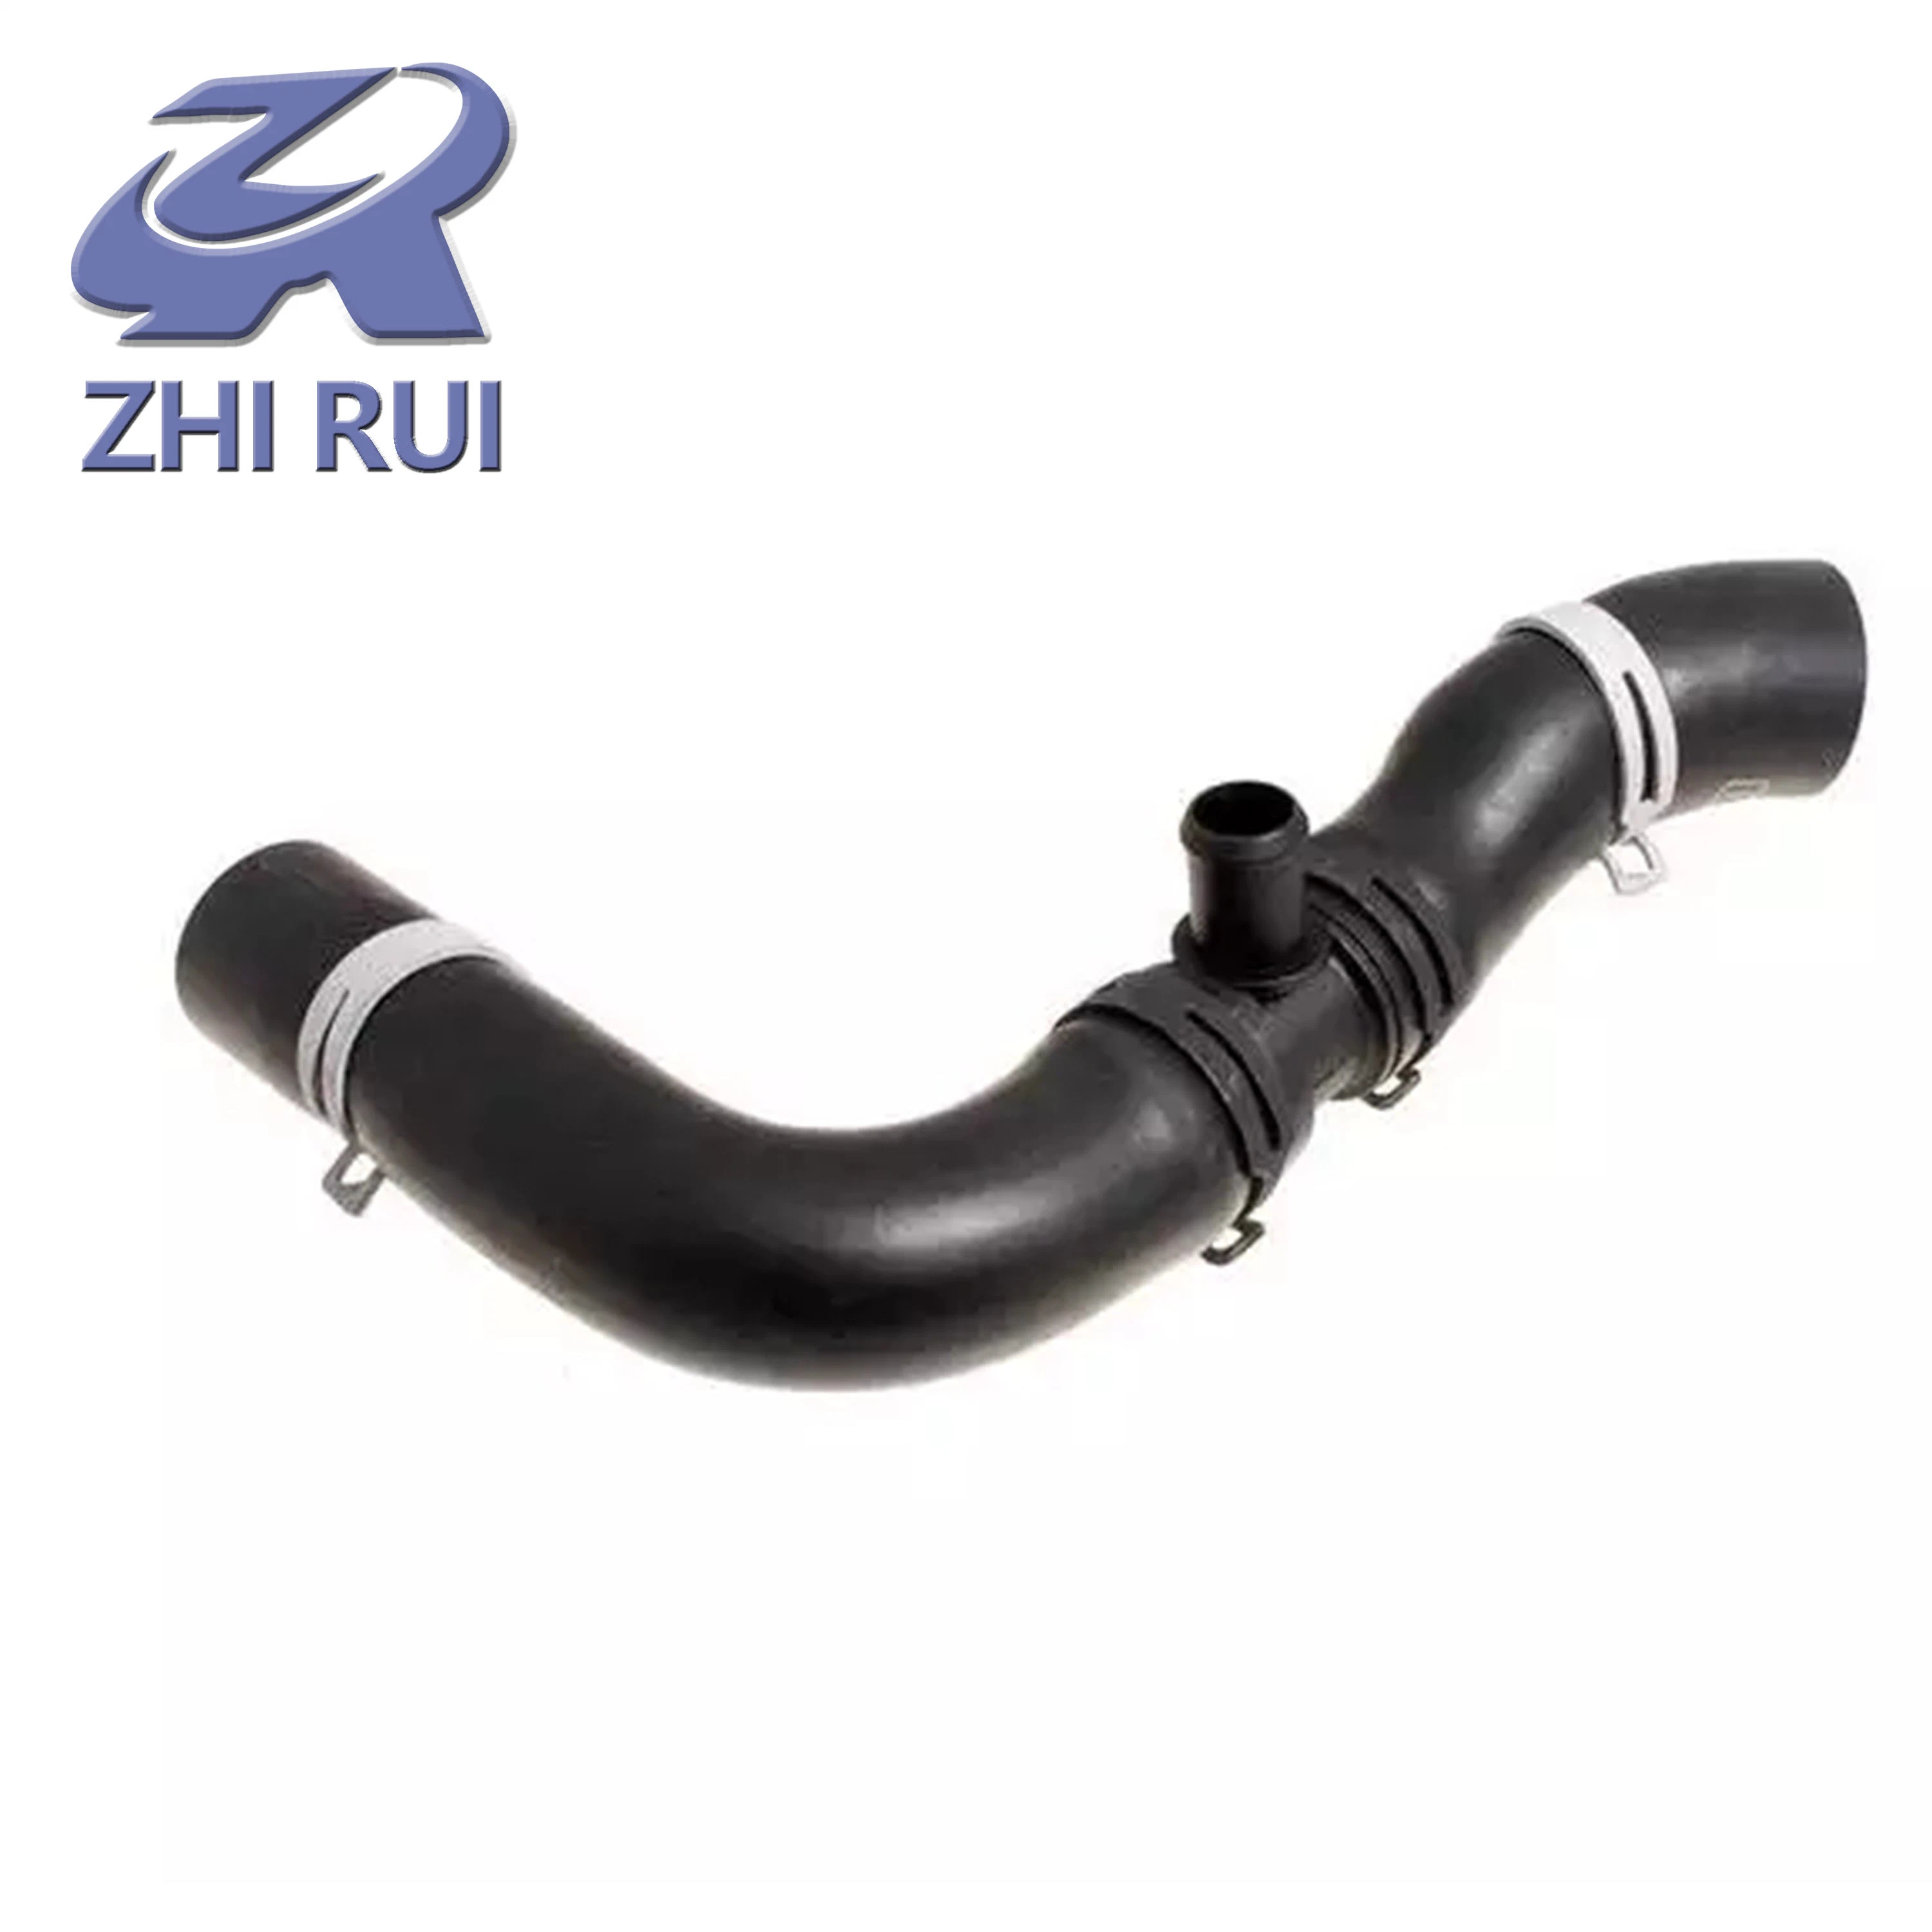 Auto Engine Radiator Coolant Hose Structure Cooling System Water Pipe for Auto Parts 4.4 V8 Hse 3.6 Tdv8 Hse V84.4 OEM Pch500941